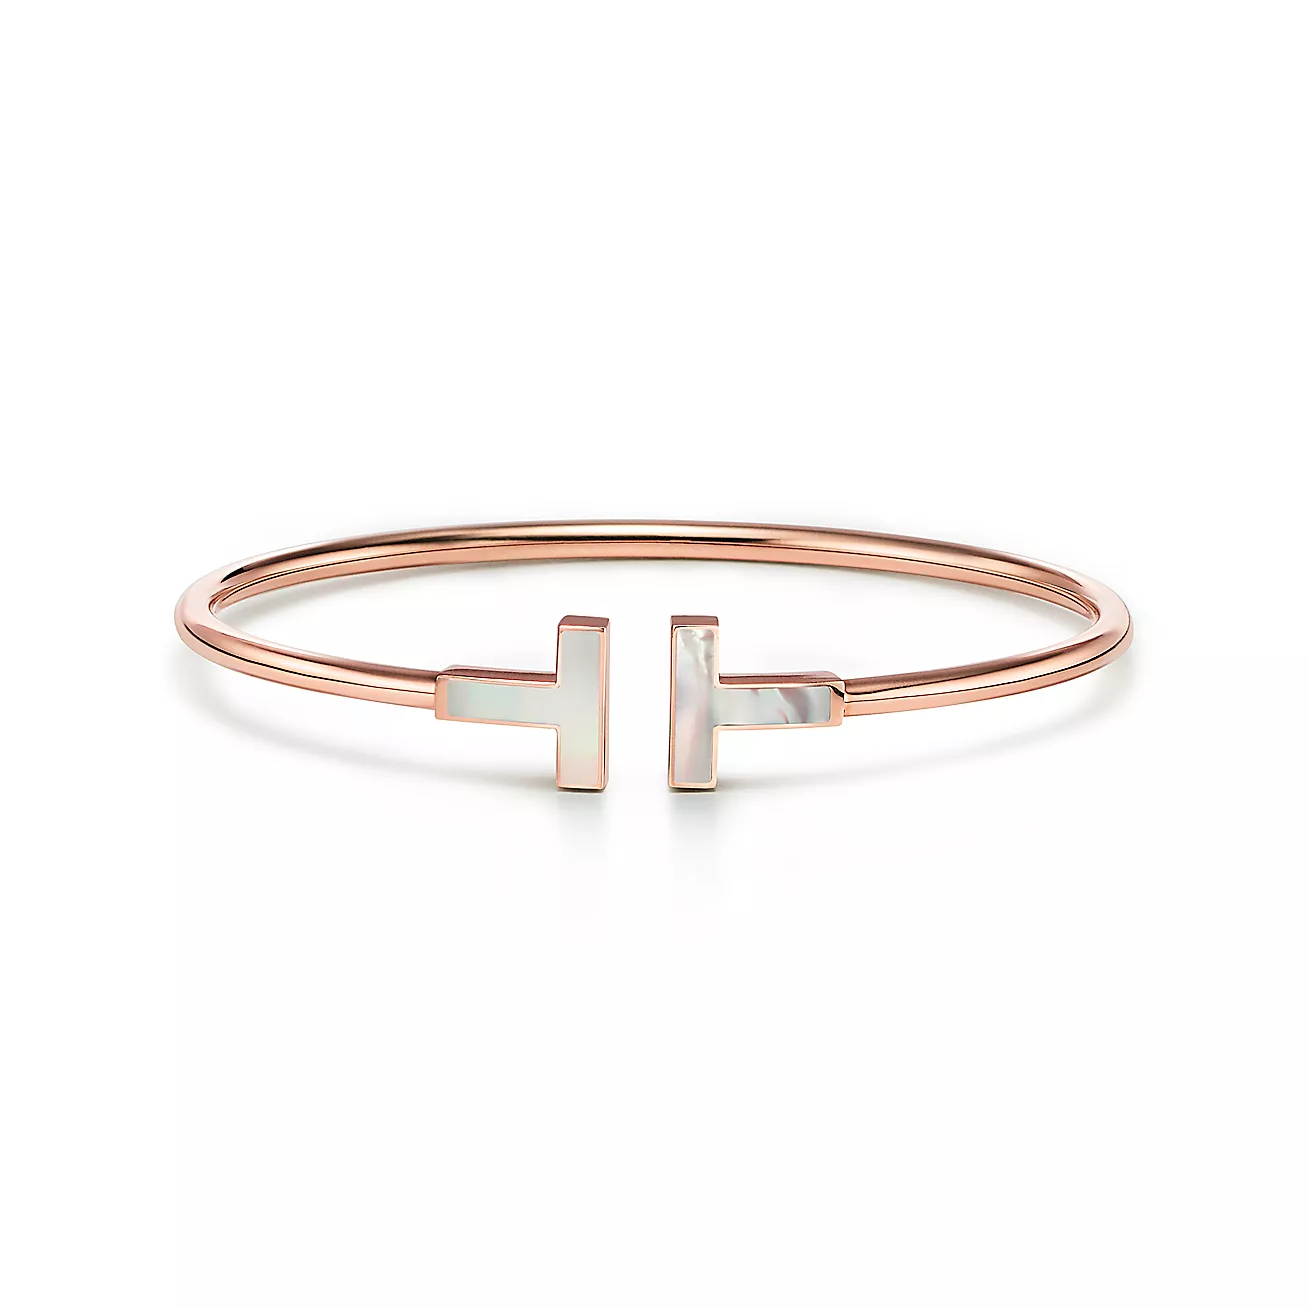 Tiffany T Wire Bracelet Rose Gold with Mother-of-pearl